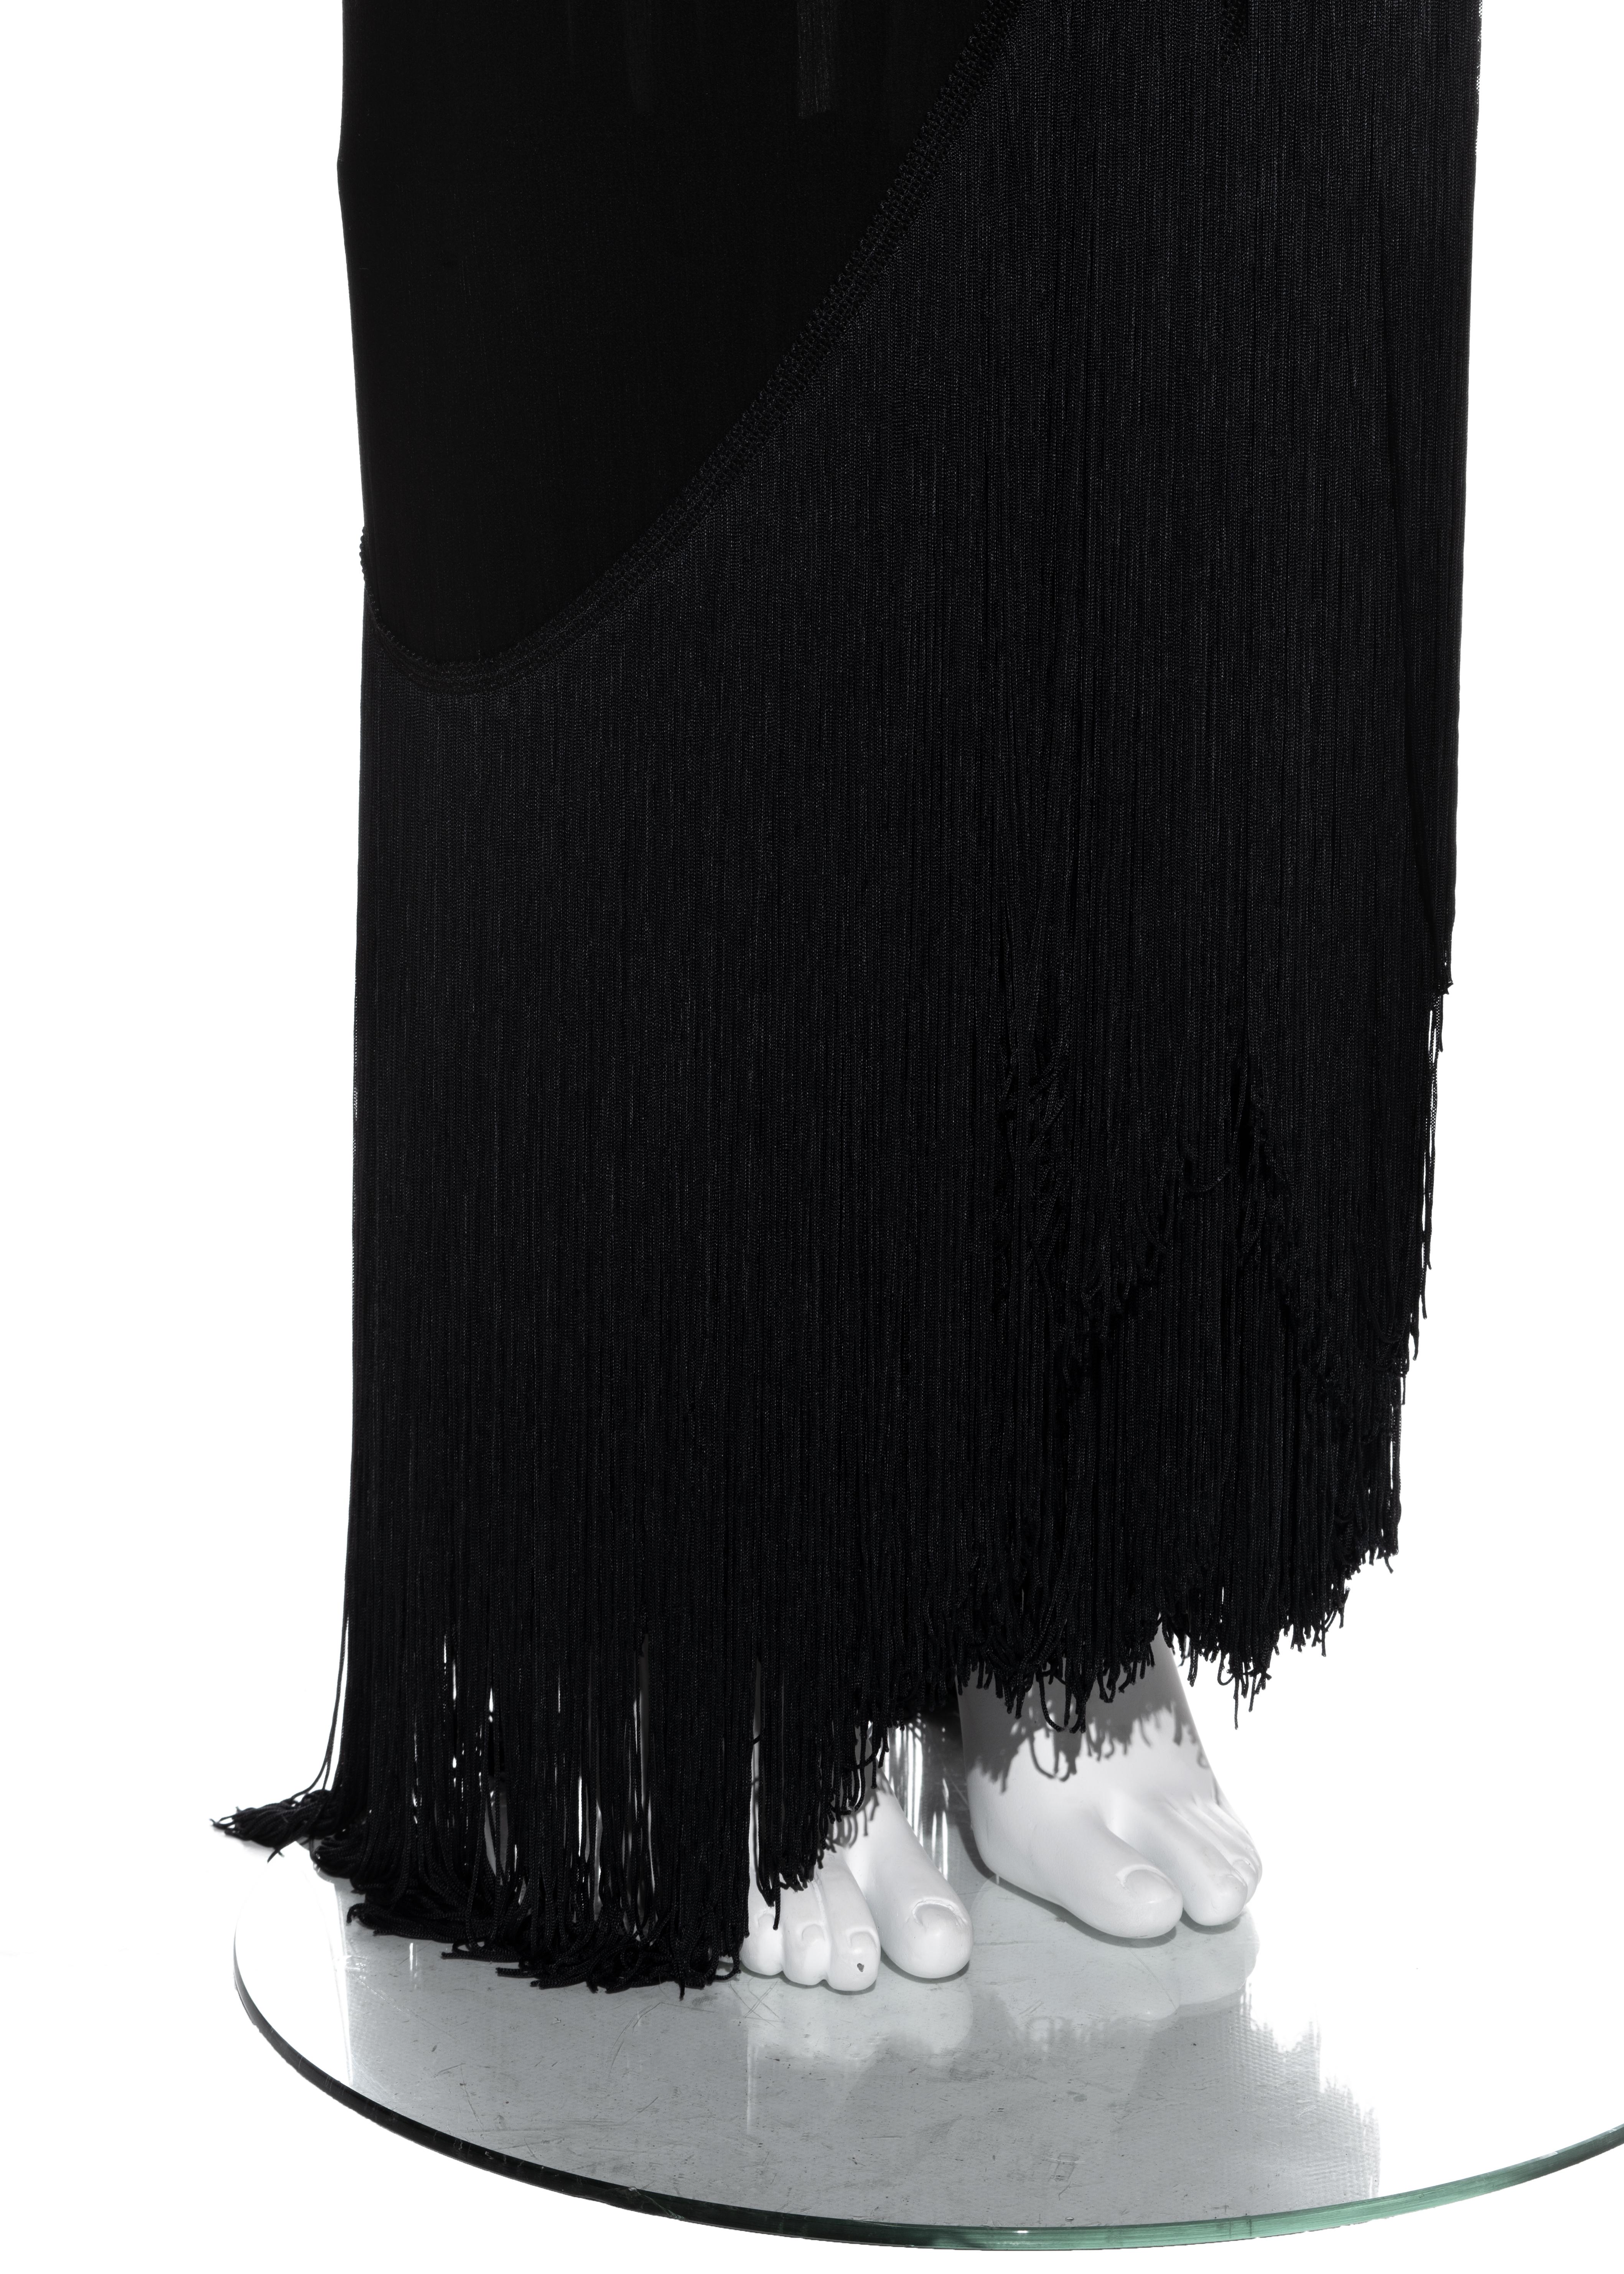 Women's Dolce & Gabbana black silk top and bustled skirt with fringed trim, fw 1993